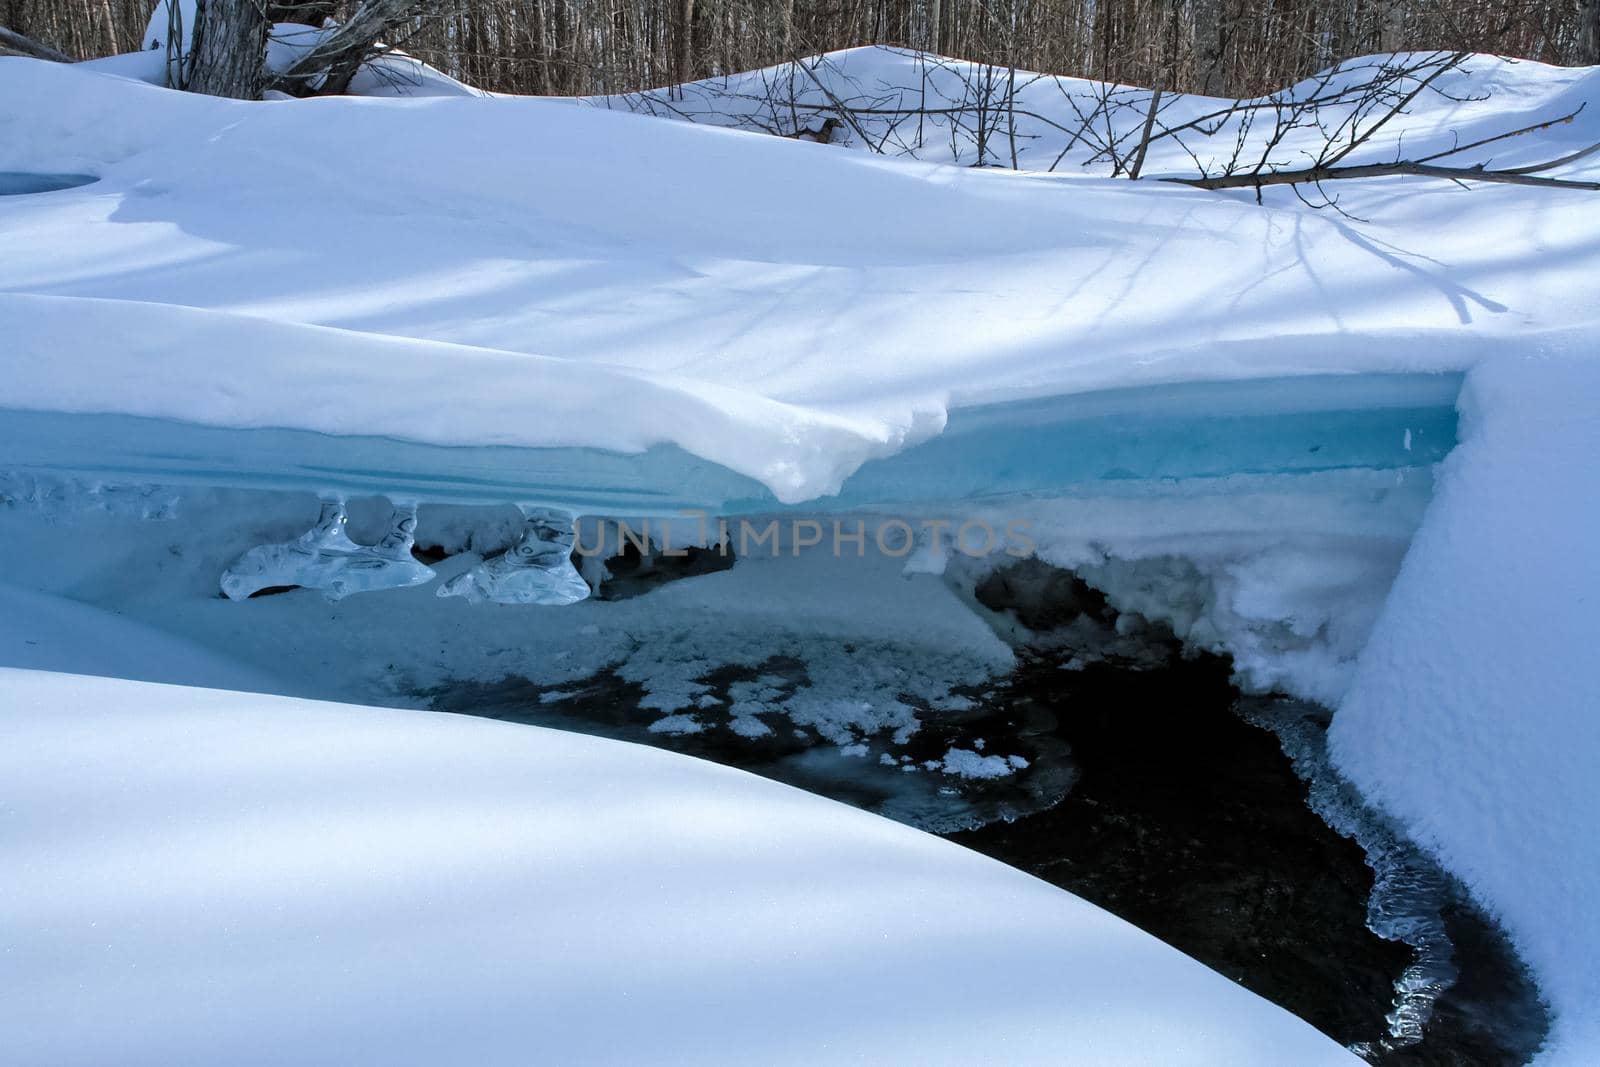 A section of the river free of snow and ice. The nature of baikal.